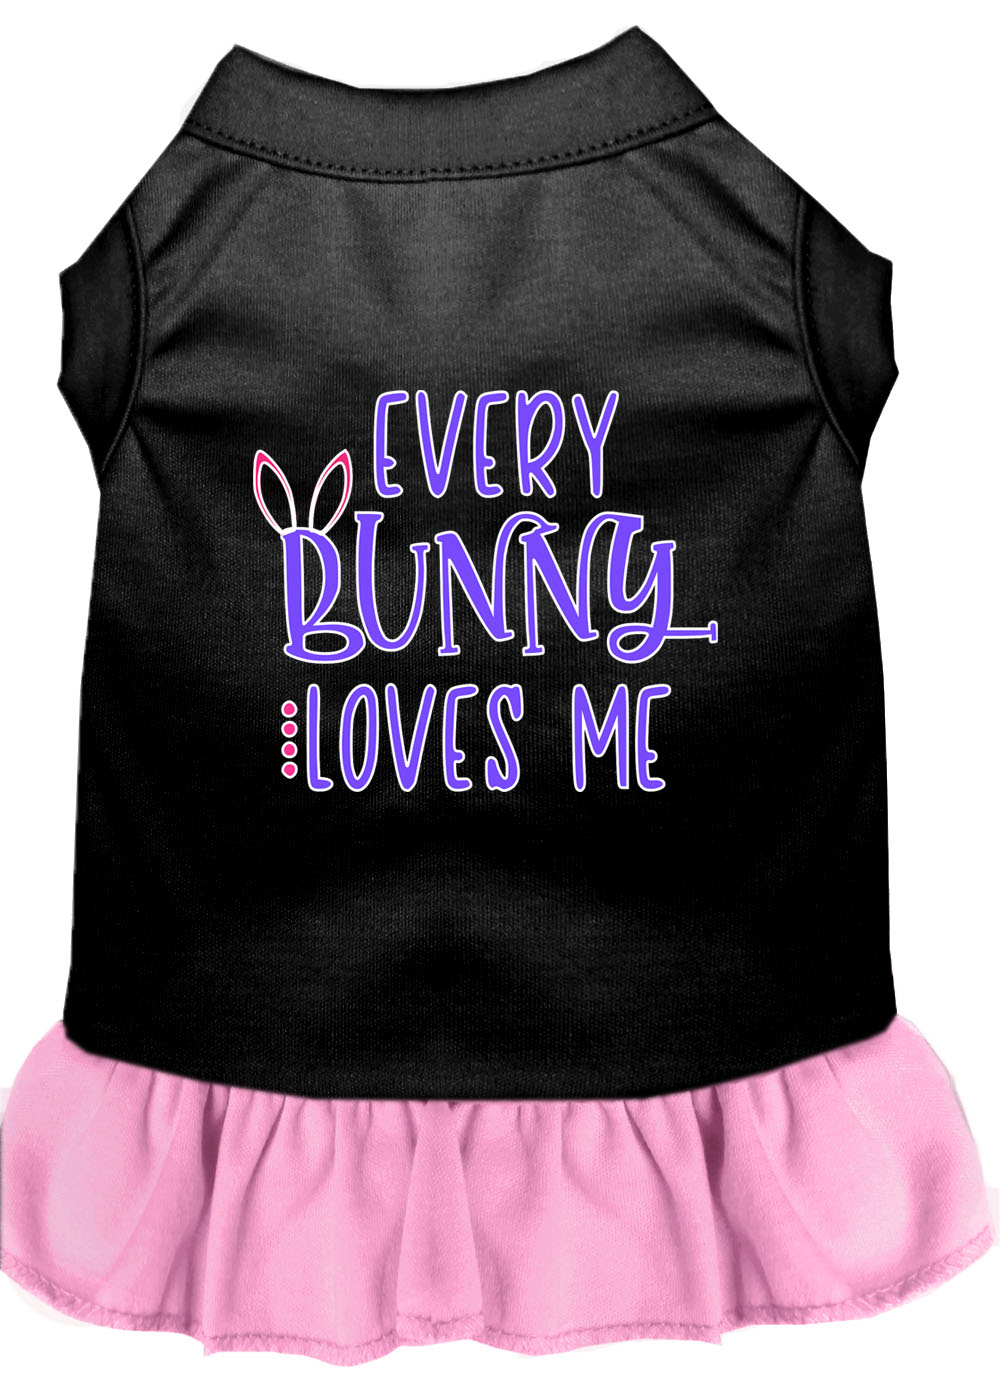 Every Bunny Loves me Screen Print Dog Dress Black with Light Pink Lg